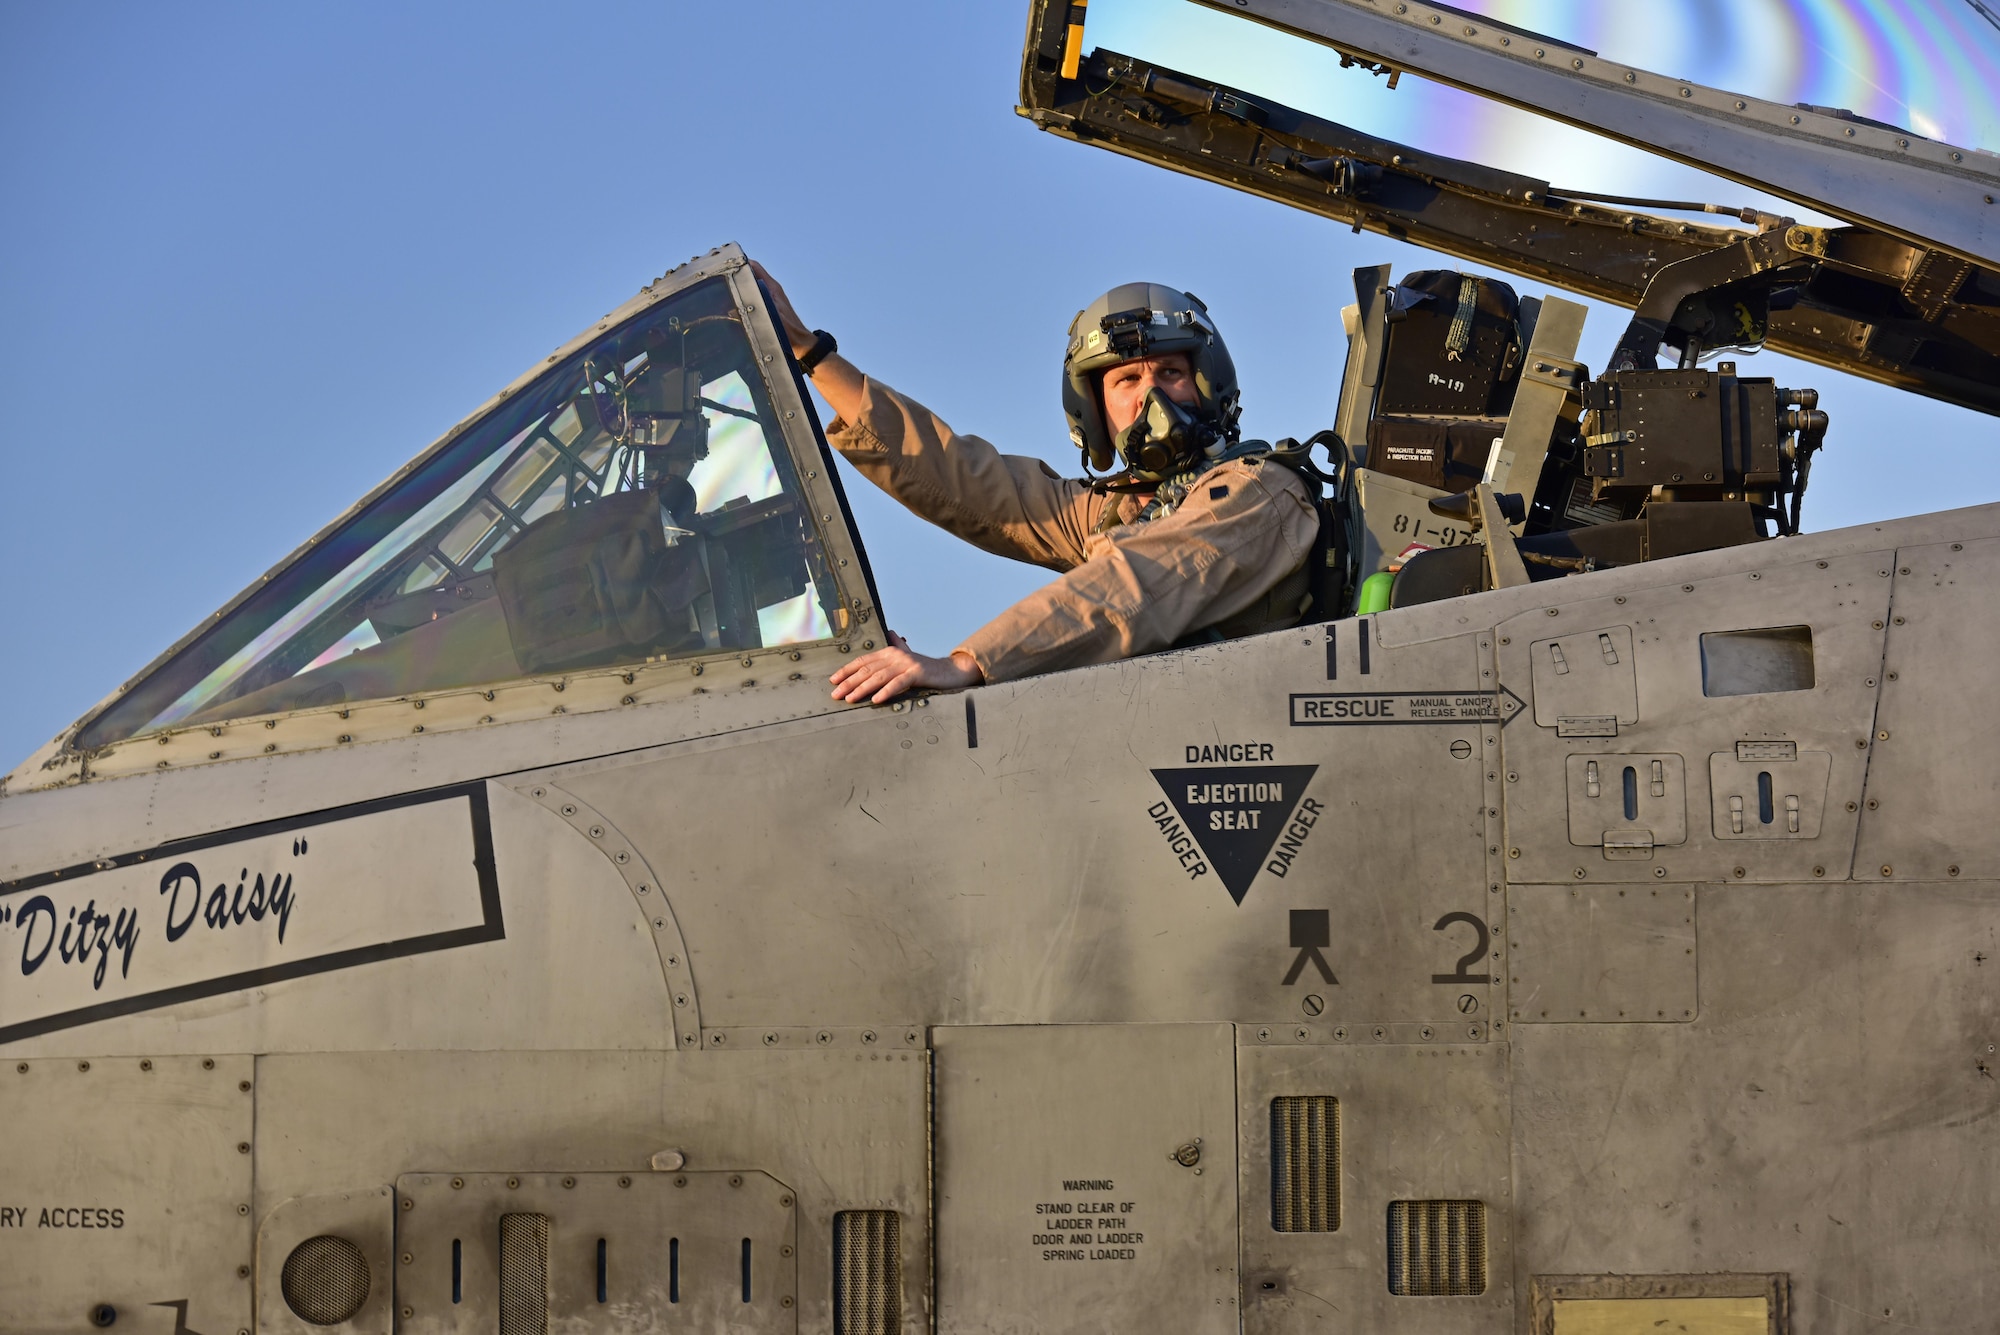 Lt. Col. Ben Rudolphi, 407th Expeditionary Operation Support Squadron commander, prepares to taxi to the flightline in an A-10 Thunderbolt II July 11, 2017, at Incirlik Air Base, Turkey. Rudolphi has provided a dual role in Operation INHERENT RESOLVE as the commander of the 407th EOSS in Southwest Asia and being directly in the fight against ISIS conducting A-10 flying missions with the 447th Air Expeditionary Group. The A-10 supports ground forces with rapid employment close air and contact support. It utilizes a variety of bomb, missiles and a 30mm GAU-8 seven-barrel Gatling gun.(U.S. Air Force photo by Senior Airman Ramon A. Adelan)